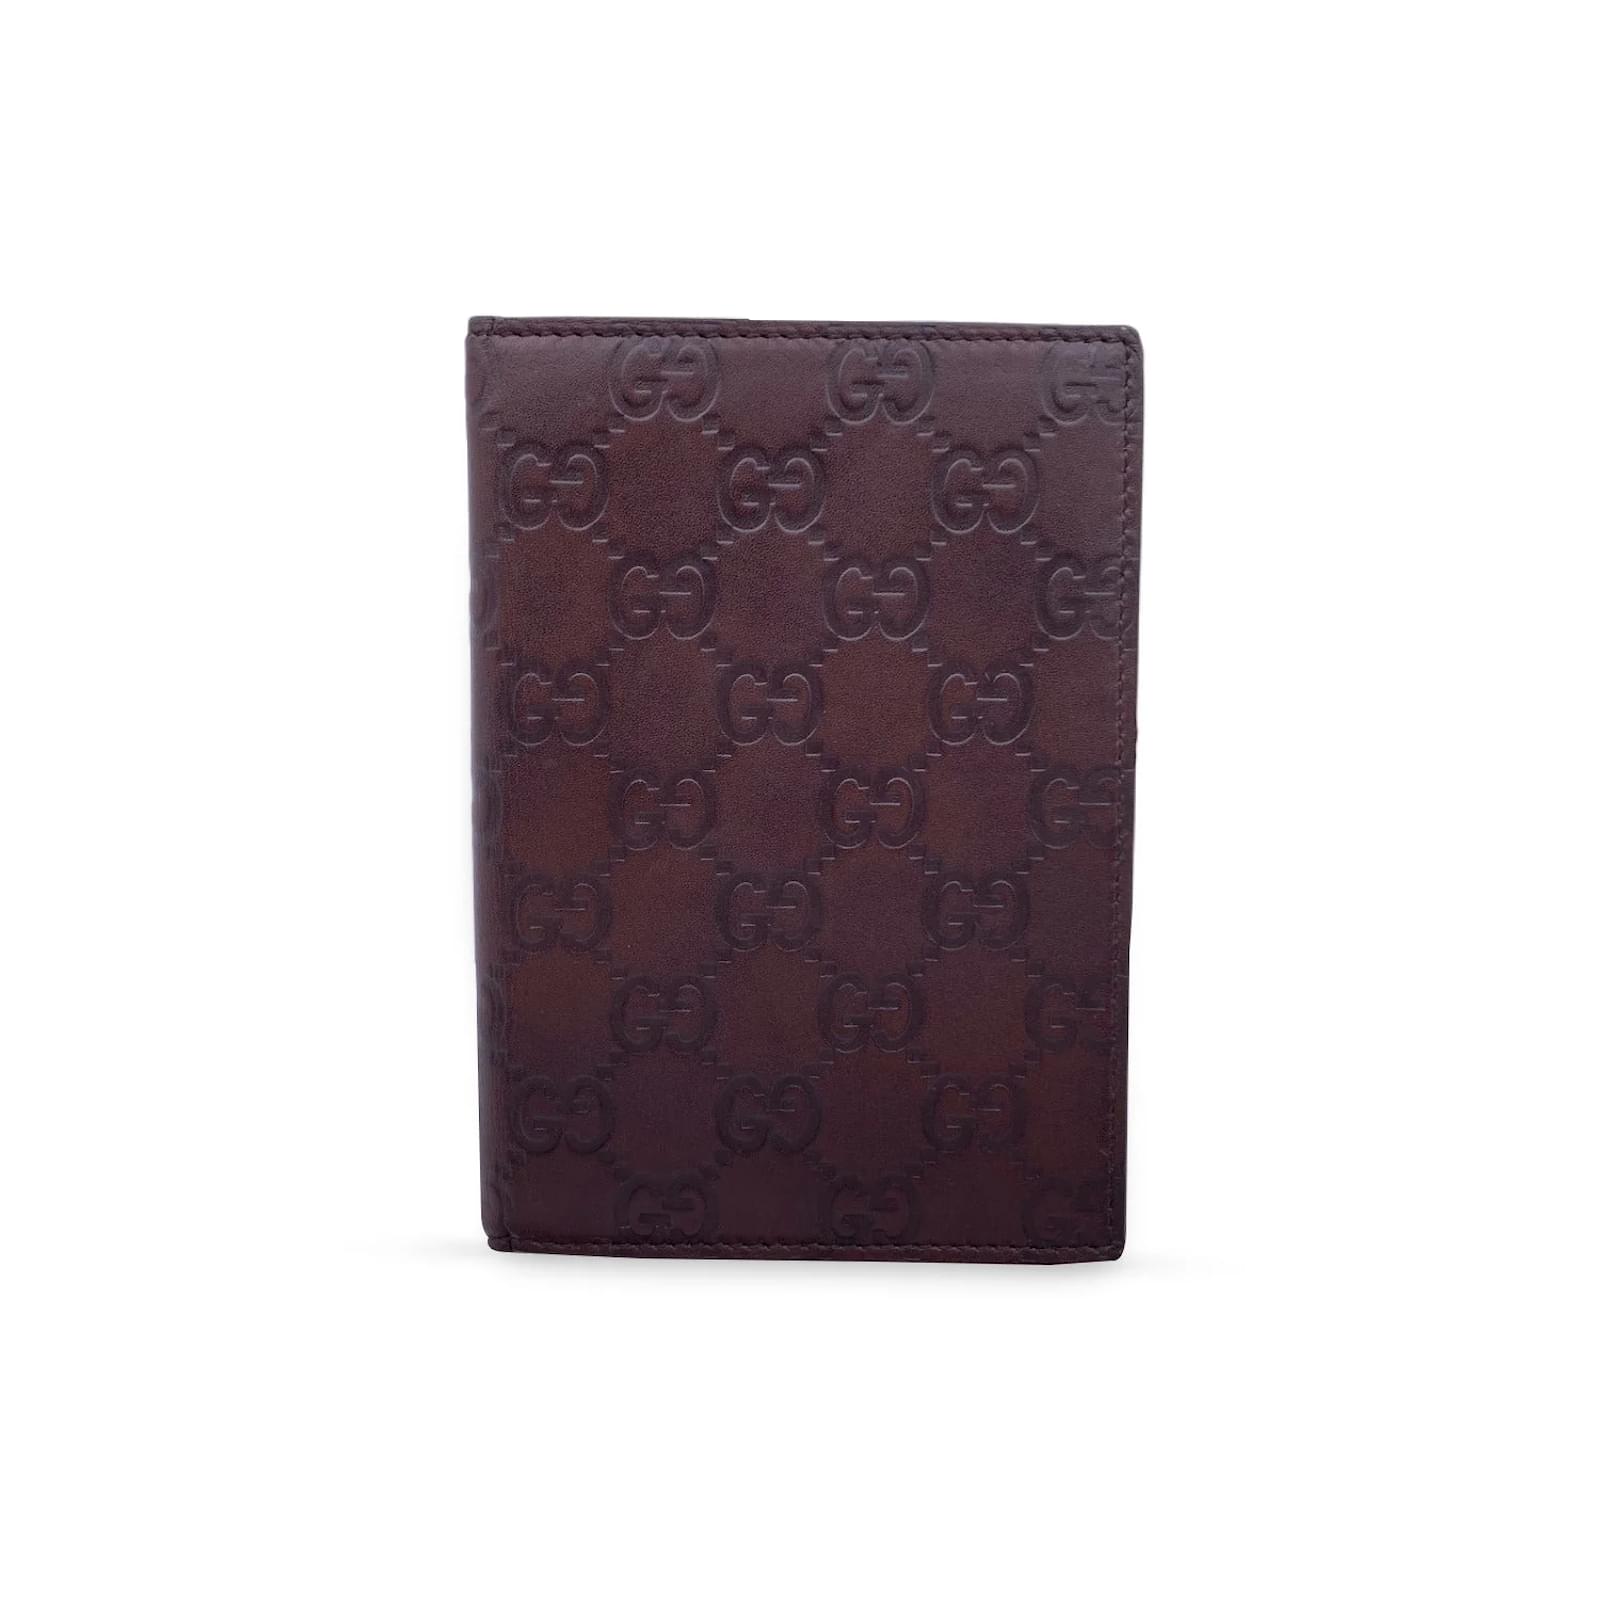 Gucci Micro Guccissima Brown Leather Passport Holder Wallet